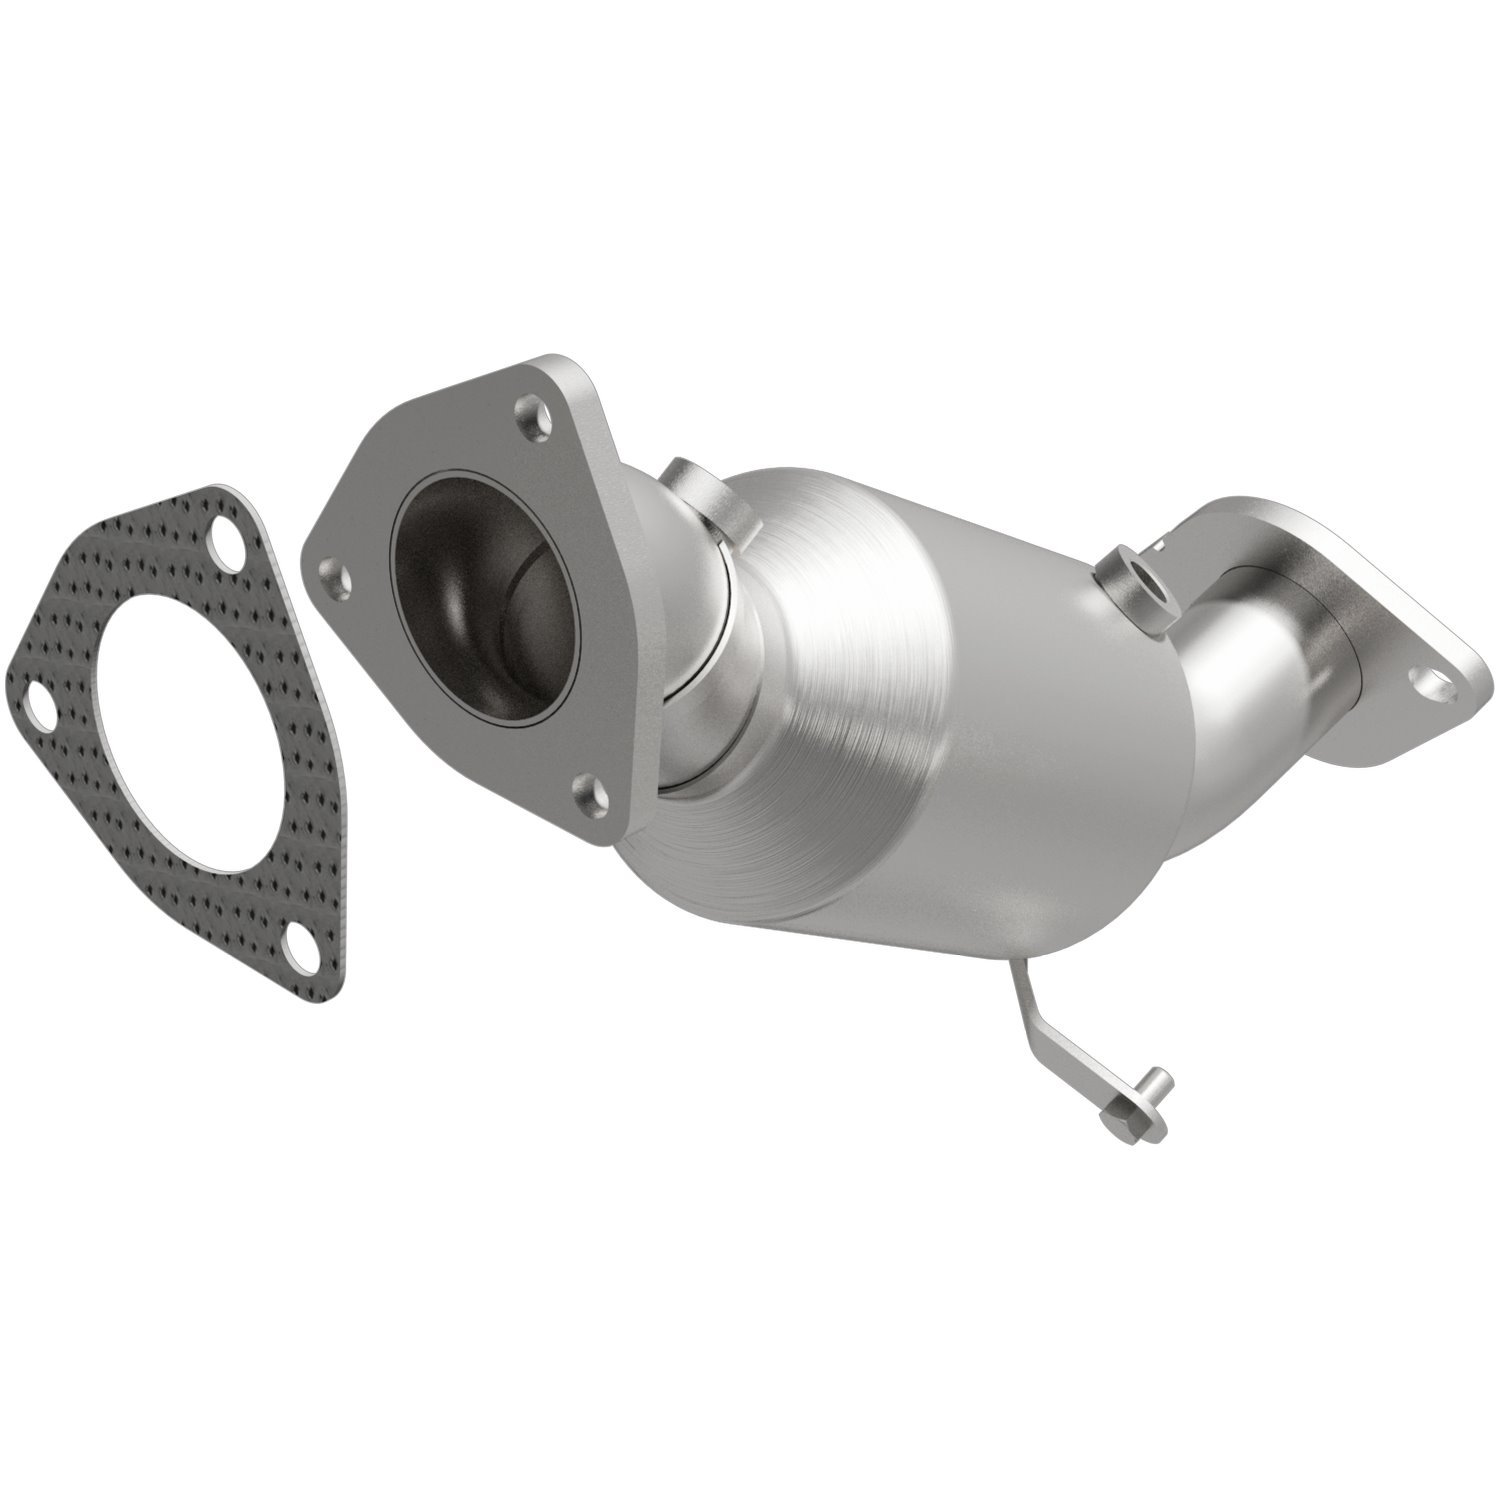 2016-2019 Cadillac CT6 OEM Grade Federal / EPA Compliant Direct-Fit Catalytic Converter